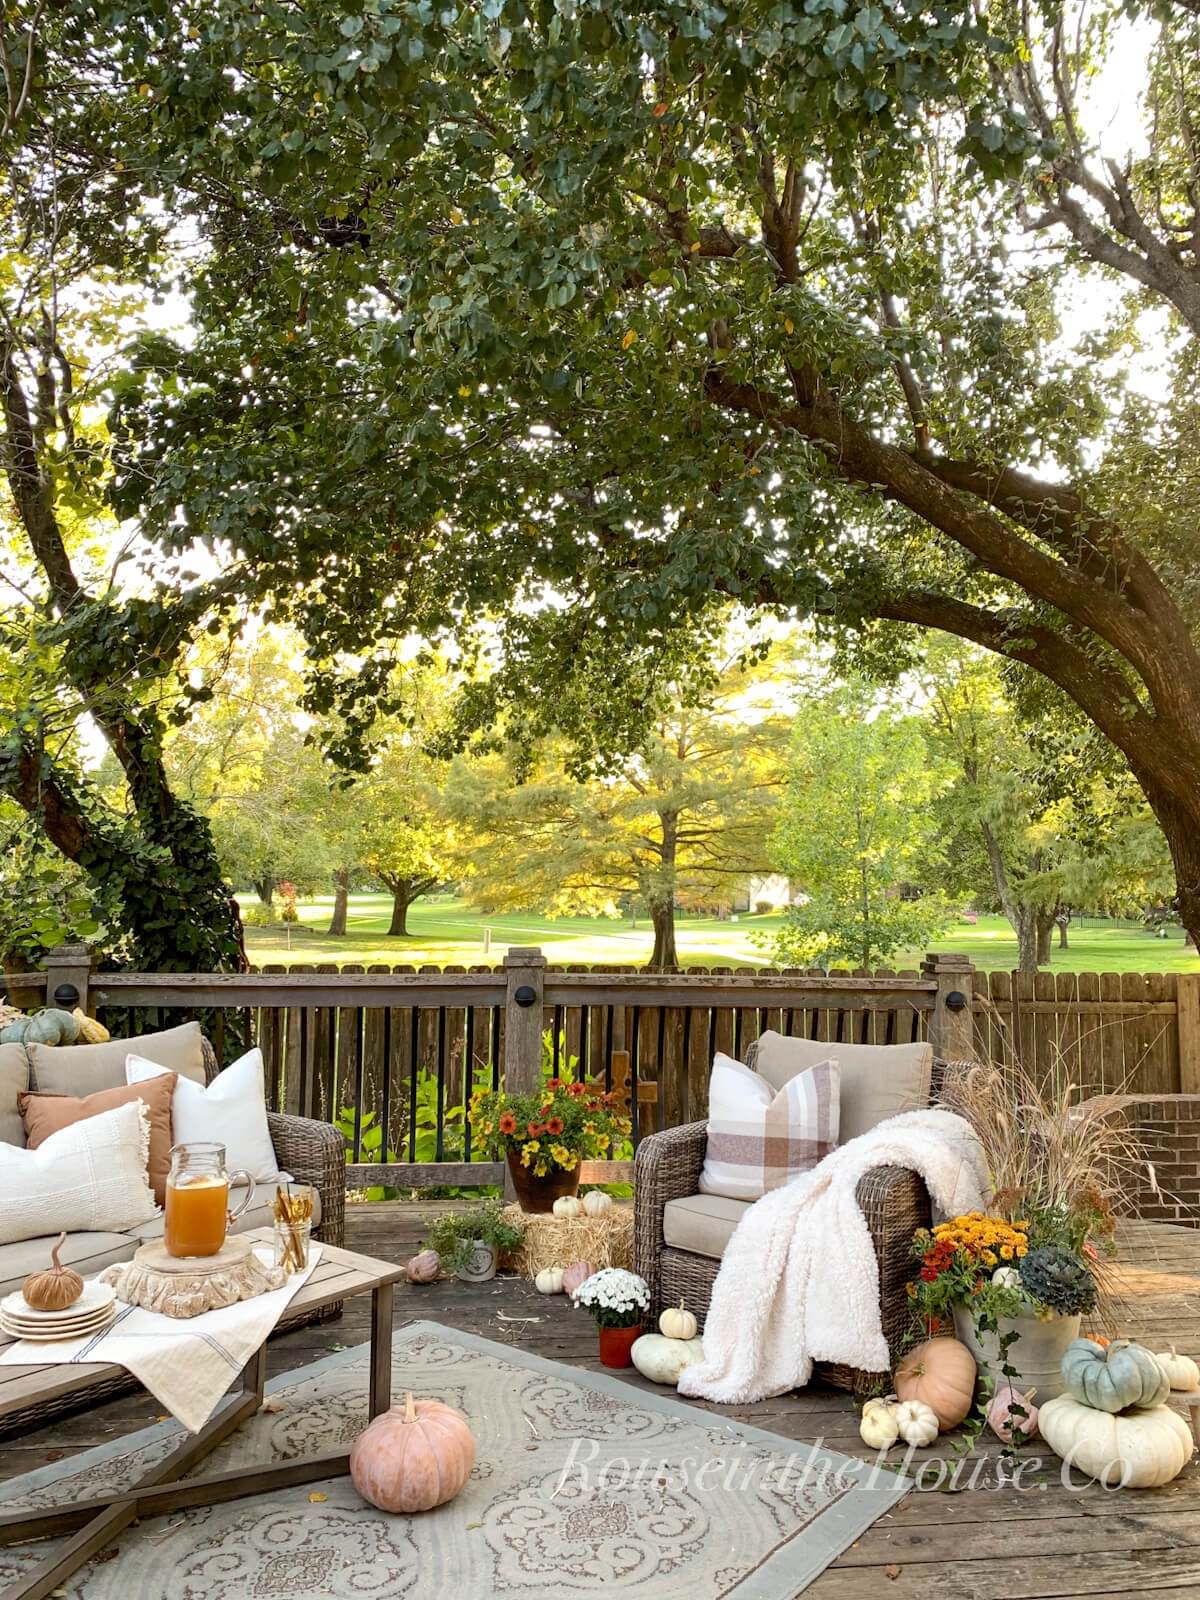 A cozy fall deck is decorated with outdoor furniture, a rug, plush pillows, fall flower containers and real heirloom pumpkins.